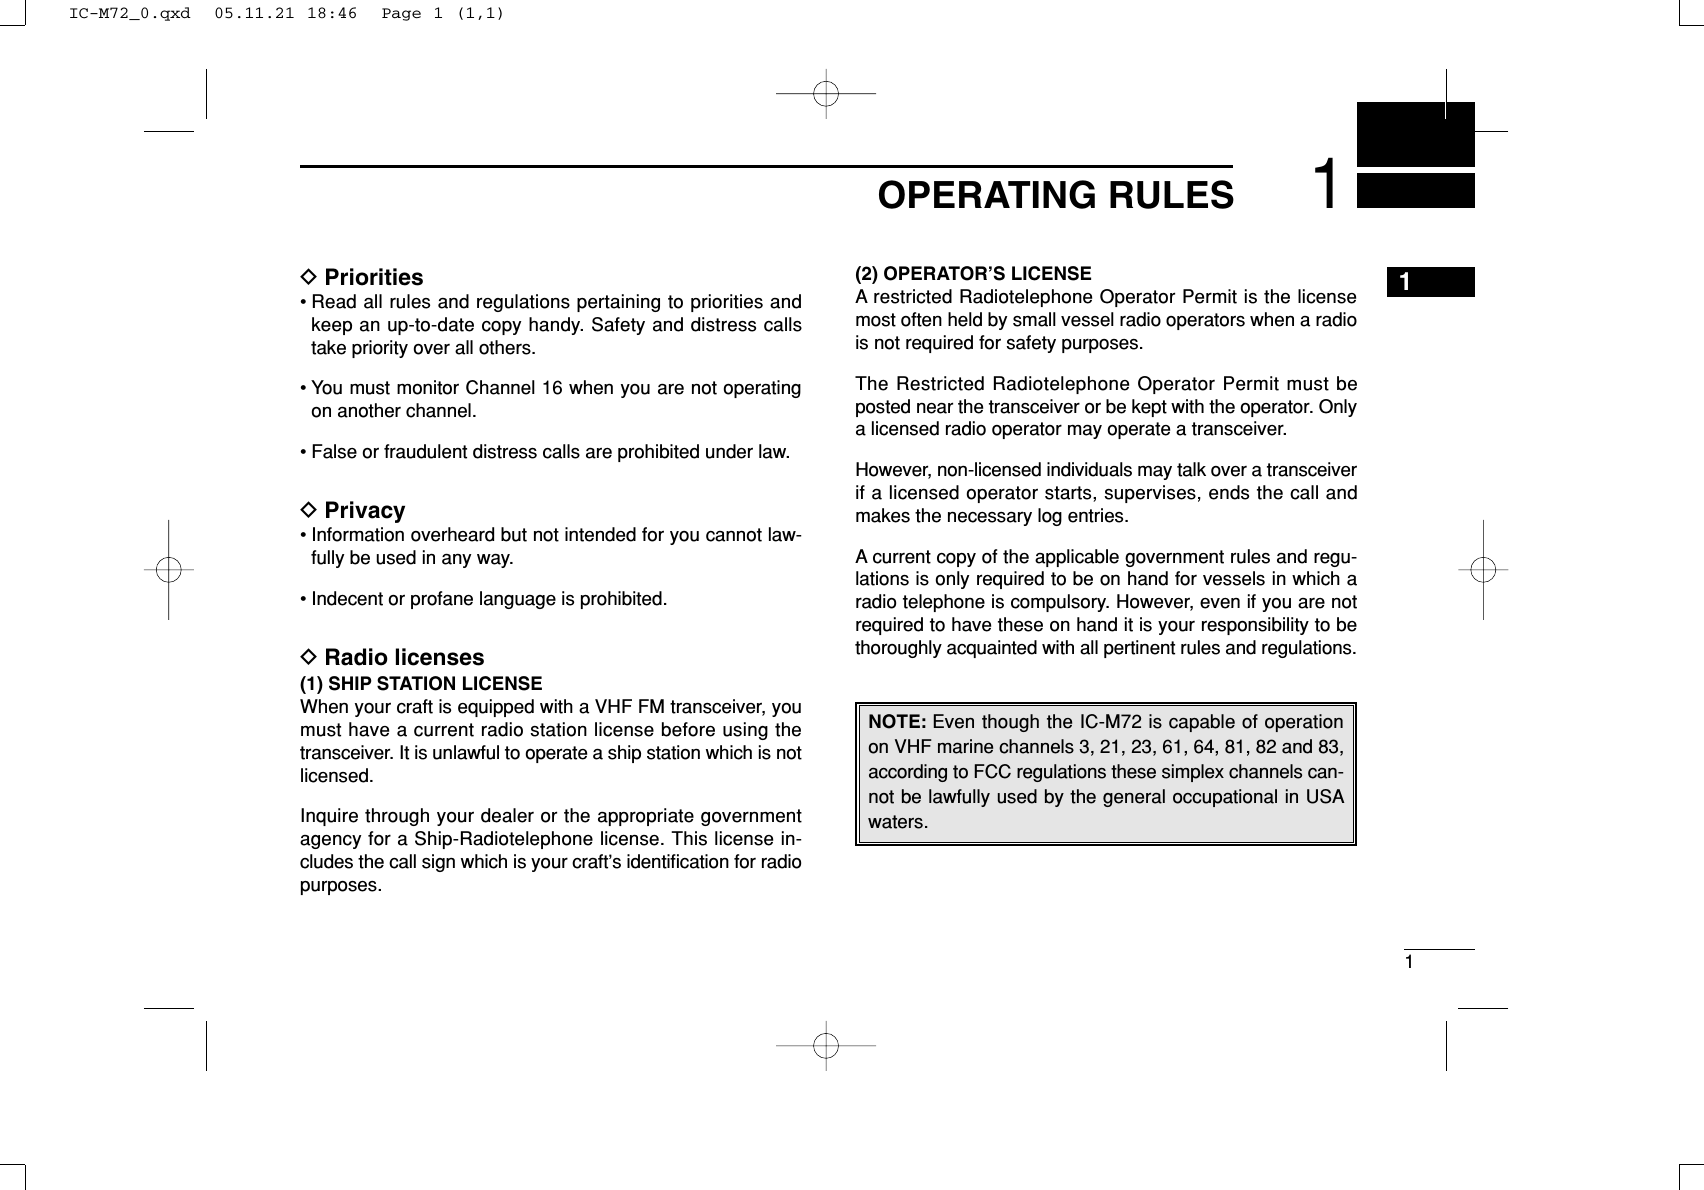 11OPERATING RULESDPriorities• Read all rules and regulations pertaining to priorities andkeep an up-to-date copy handy. Safety and distress callstake priority over all others.• You must monitor Channel 16 when you are not operatingon another channel.• False or fraudulent distress calls are prohibited under law.DPrivacy• Information overheard but not intended for you cannot law-fully be used in any way.• Indecent or profane language is prohibited.DRadio licenses(1) SHIP STATION LICENSEWhen your craft is equipped with a VHF FM transceiver, youmust have a current radio station license before using thetransceiver. It is unlawful to operate a ship station which is notlicensed.Inquire through your dealer or the appropriate governmentagency for a Ship-Radiotelephone license. This license in-cludes the call sign which is your craft’s identiﬁcation for radiopurposes.(2) OPERATOR’S LICENSEA restricted Radiotelephone Operator Permit is the licensemost often held by small vessel radio operators when a radiois not required for safety purposes.The Restricted Radiotelephone Operator Permit must beposted near the transceiver or be kept with the operator. Onlya licensed radio operator may operate a transceiver.However, non-licensed individuals may talk over a transceiverif a licensed operator starts, supervises, ends the call andmakes the necessary log entries.A current copy of the applicable government rules and regu-lations is only required to be on hand for vessels in which aradio telephone is compulsory. However, even if you are notrequired to have these on hand it is your responsibility to bethoroughly acquainted with all pertinent rules and regulations.NOTE: Even though the IC-M72 is capable of operationon VHF marine channels 3, 21, 23, 61, 64, 81, 82 and 83,according to FCC regulations these simplex channels can-not be lawfully used by the general occupational in USAwaters.1IC-M72_0.qxd  05.11.21 18:46  Page 1 (1,1)